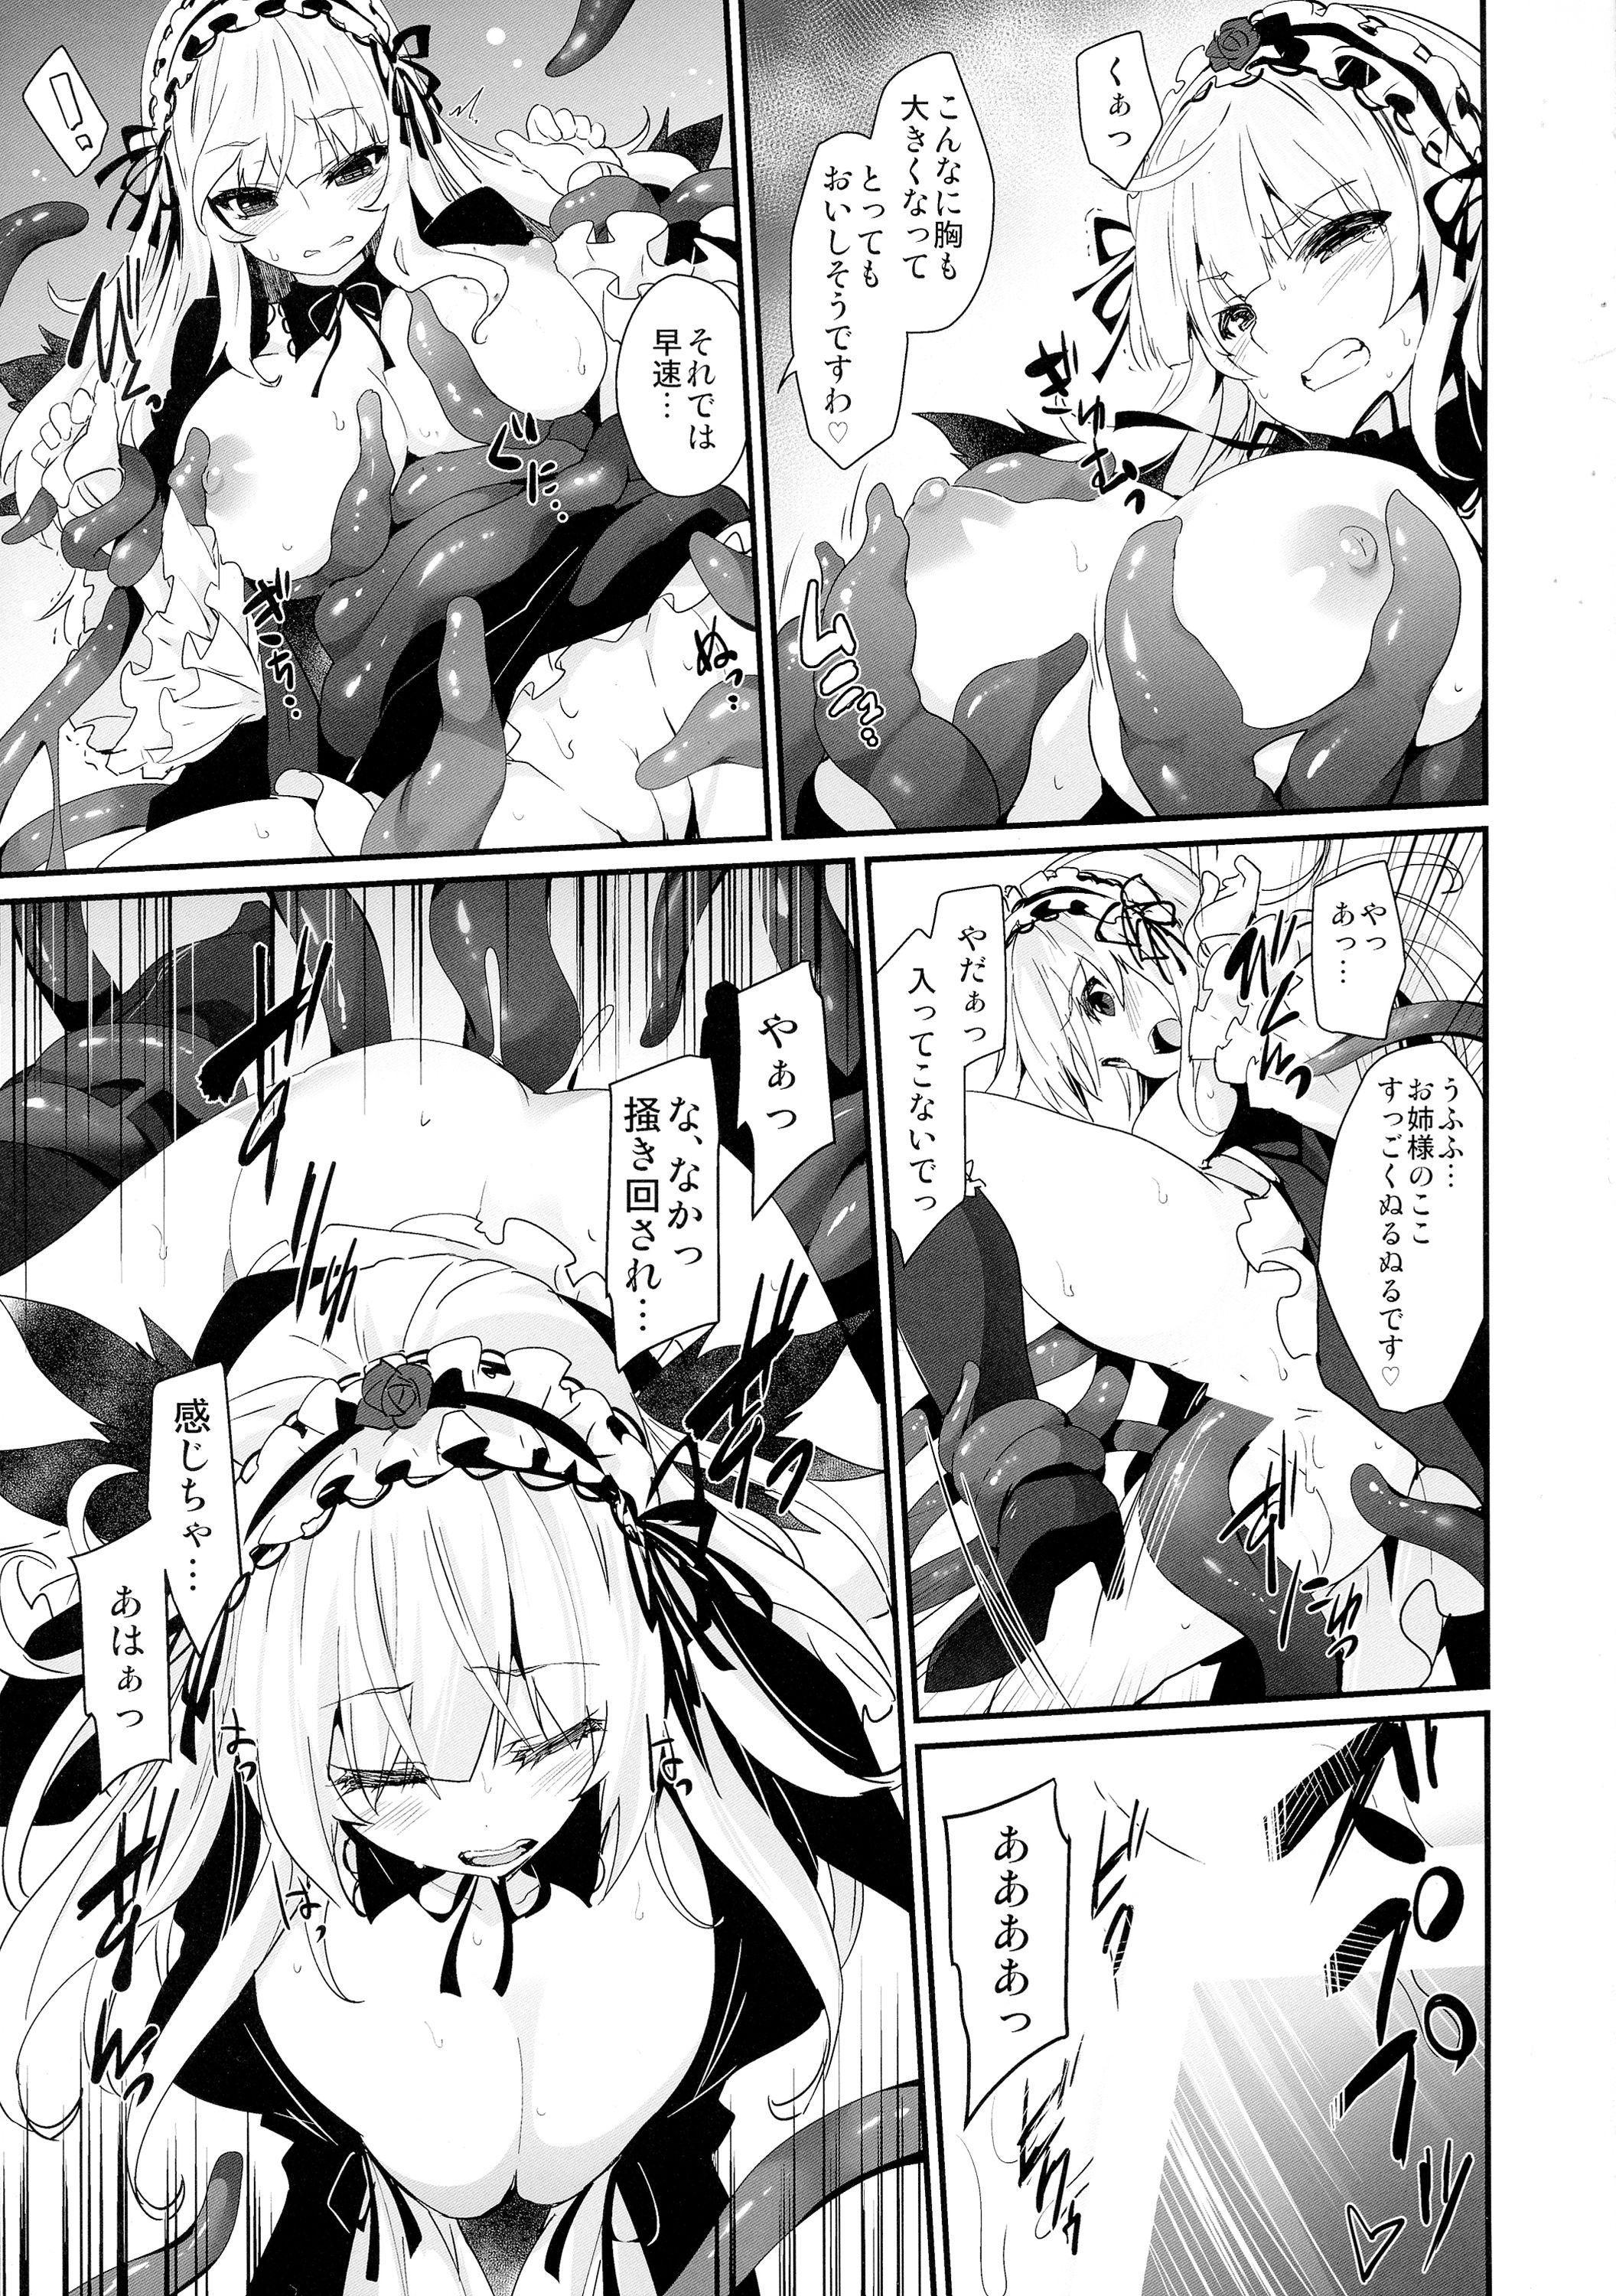 Friend Meat Rose - Rozen maiden Omegle - Page 7